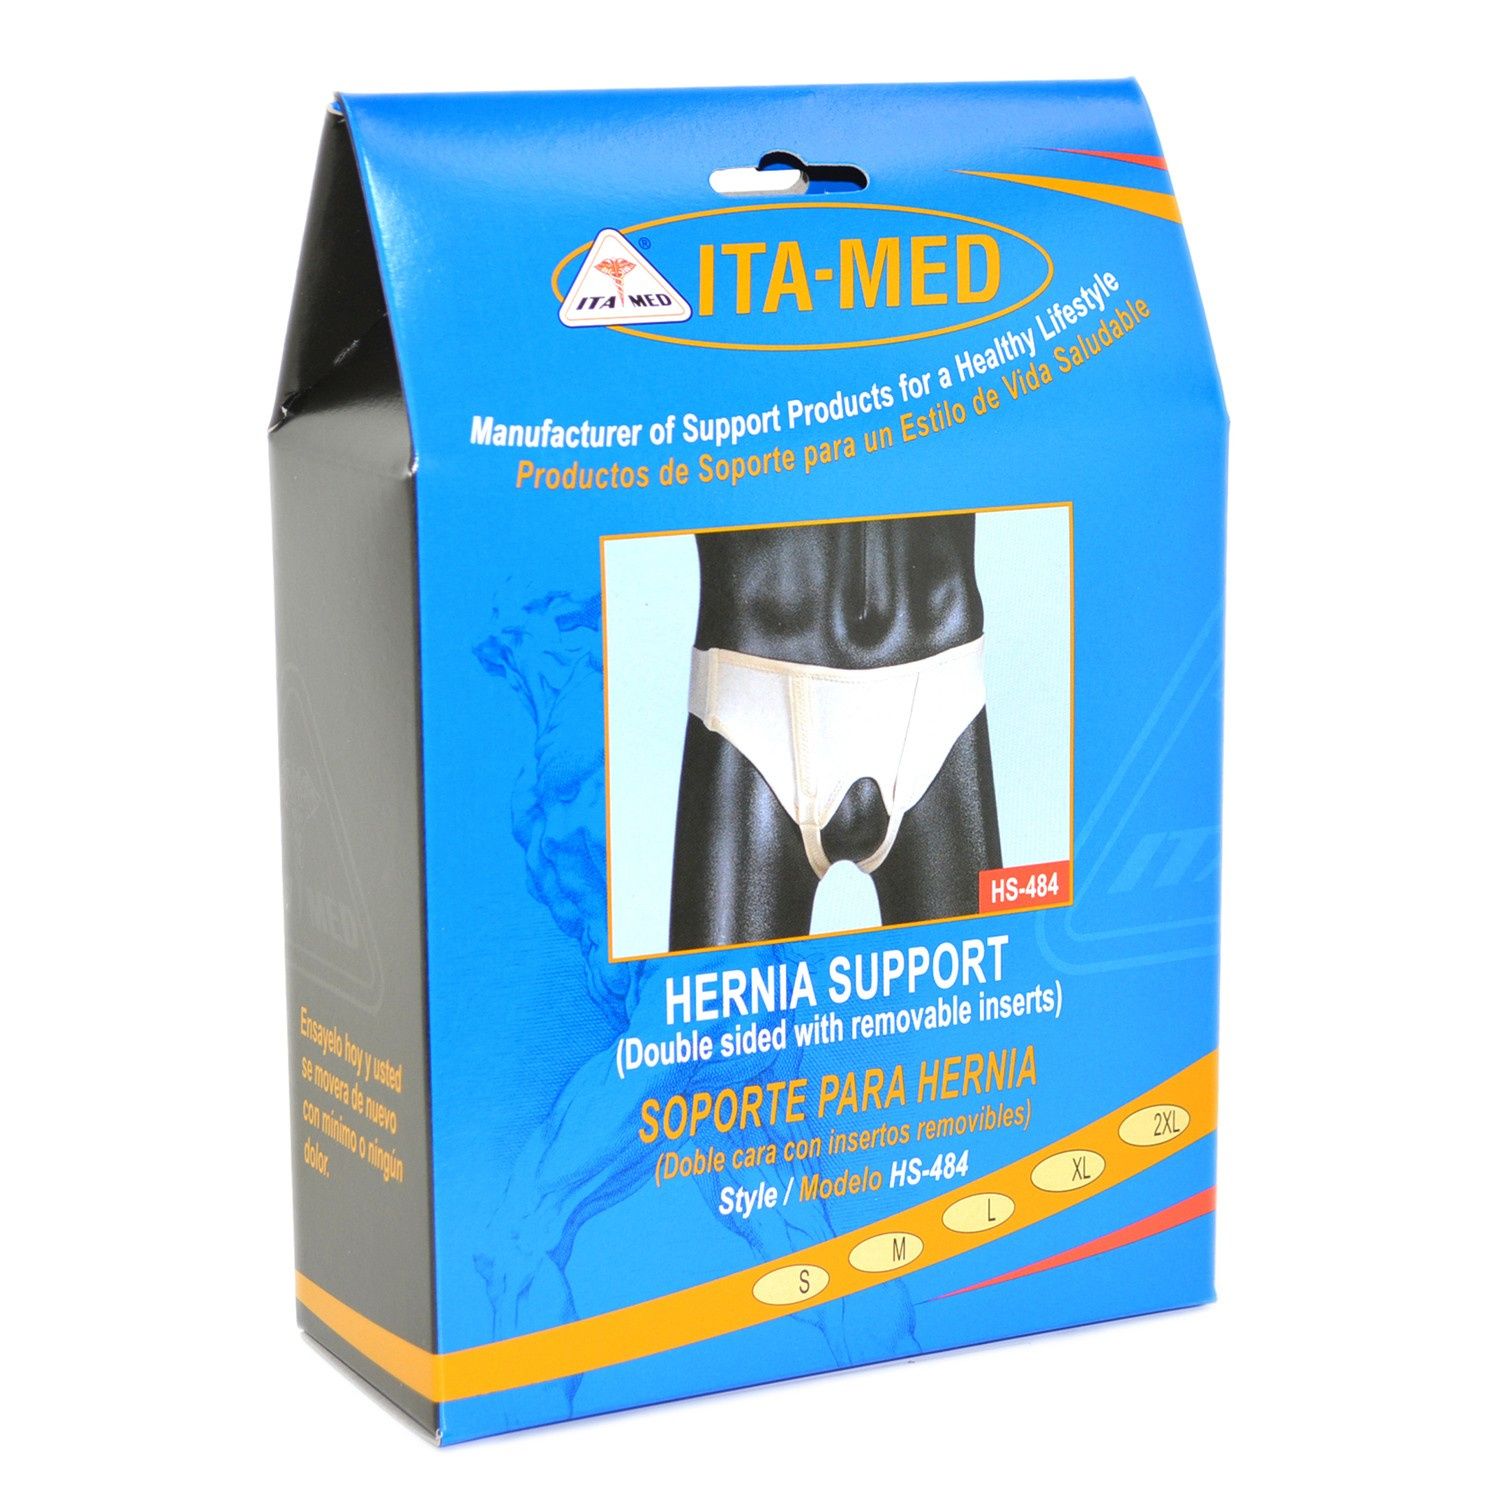 The Complete List of the Best Hernia Support Products - NCO